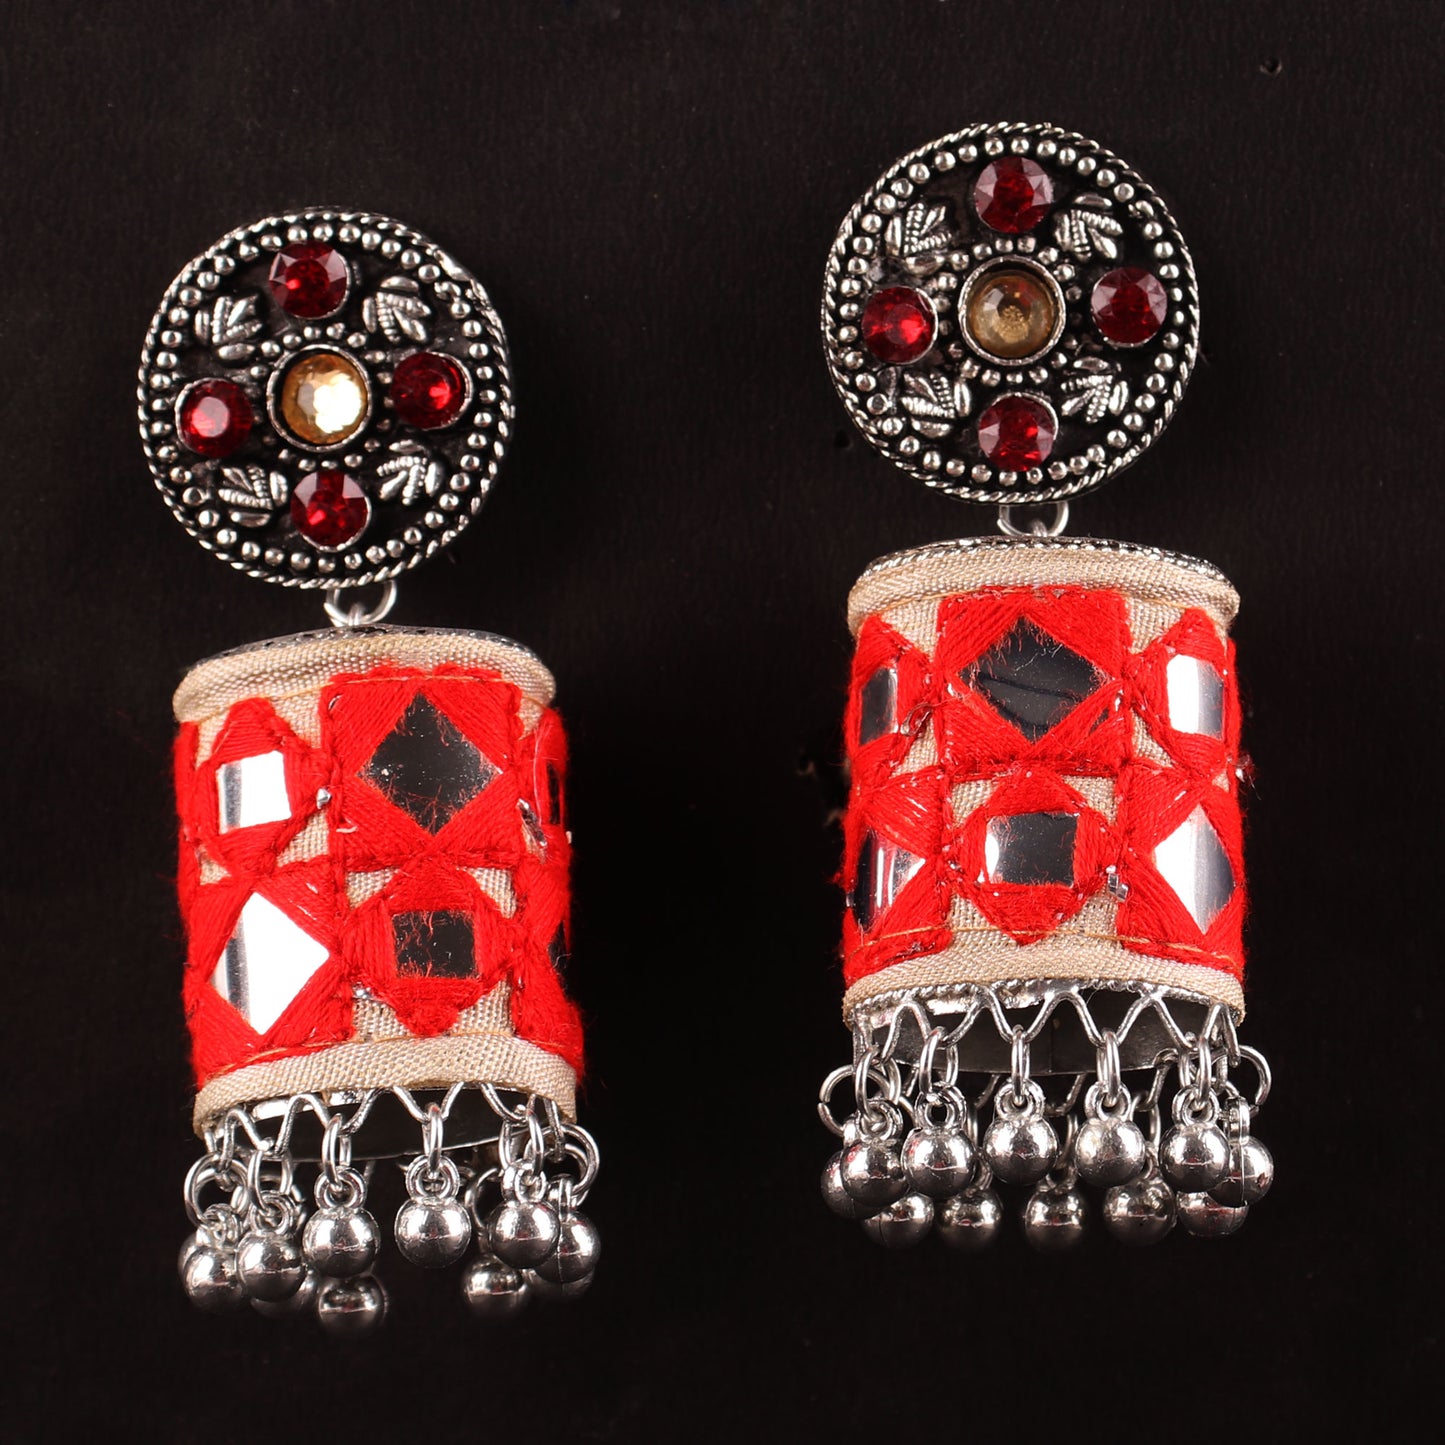 Earrings,The Artwork Earring in Red & Off-White - Cippele Multi Store